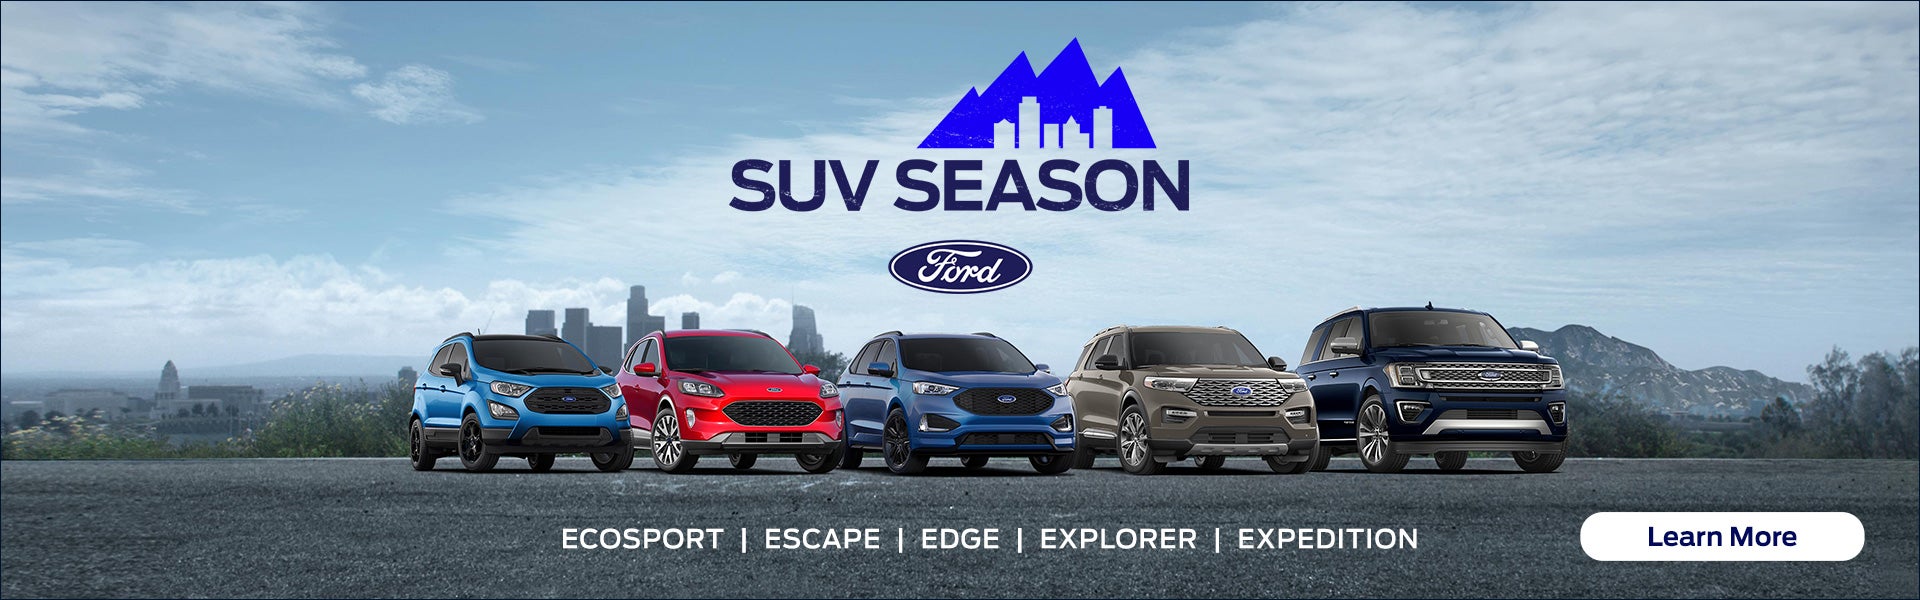 SUV Season at Stivers Ford Lincoln in Waukee, IA